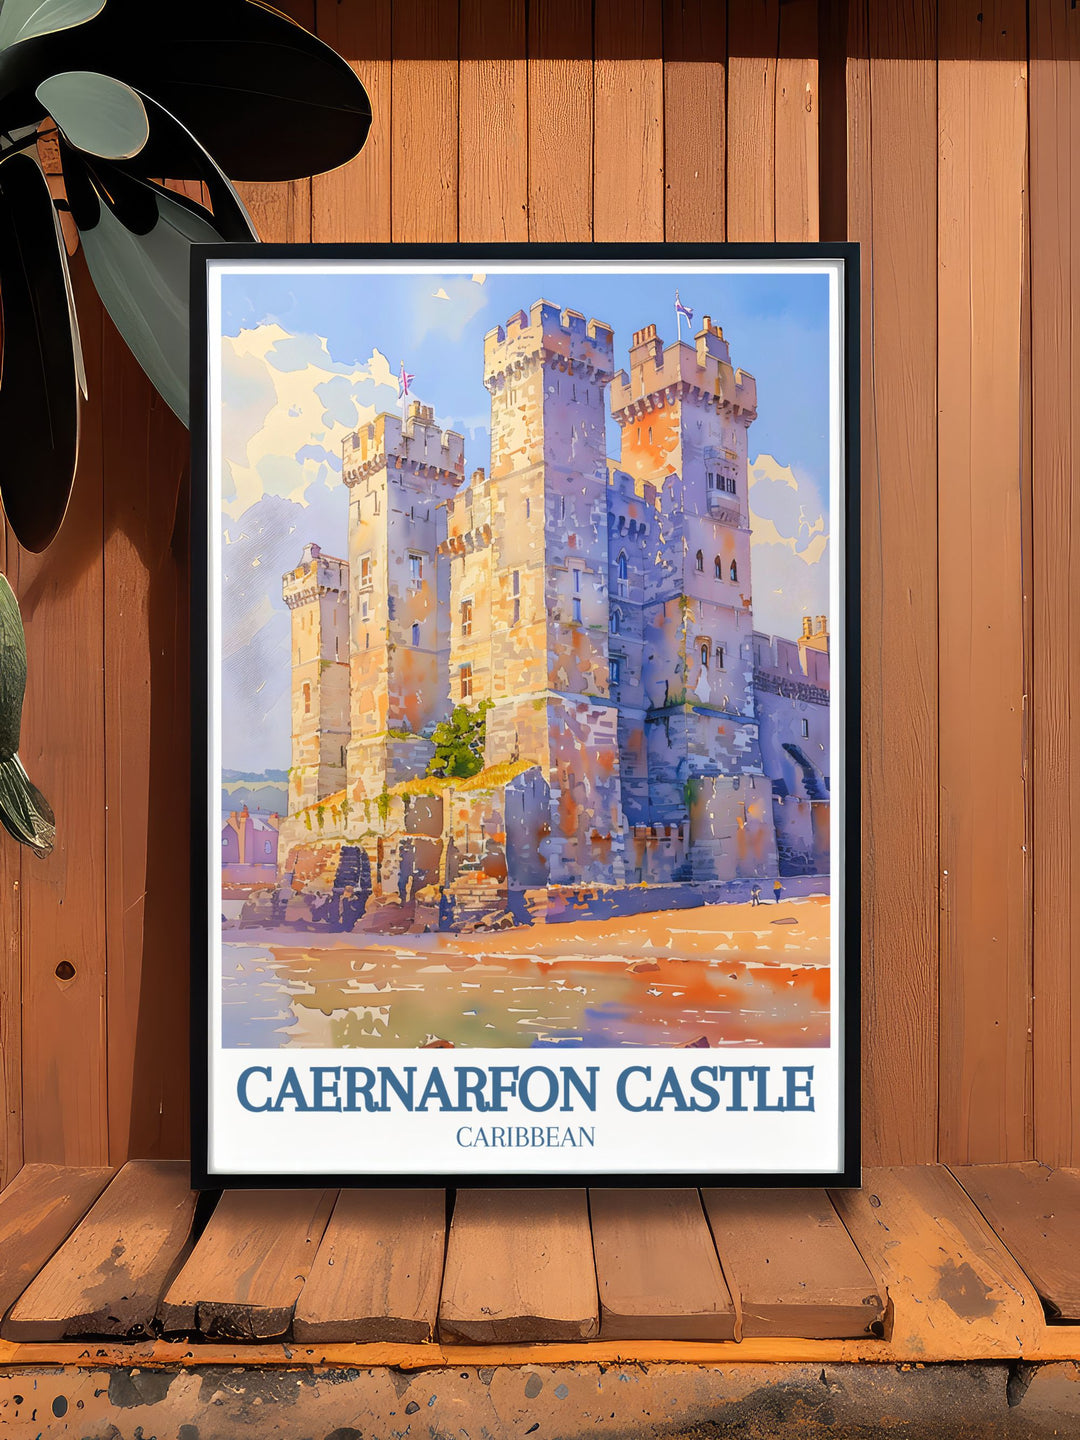 This framed print of Caernarfon Castle and the Menai Strait captures the essence of Welsh heritage, offering a perfect blend of natural and historical beauty for your home.